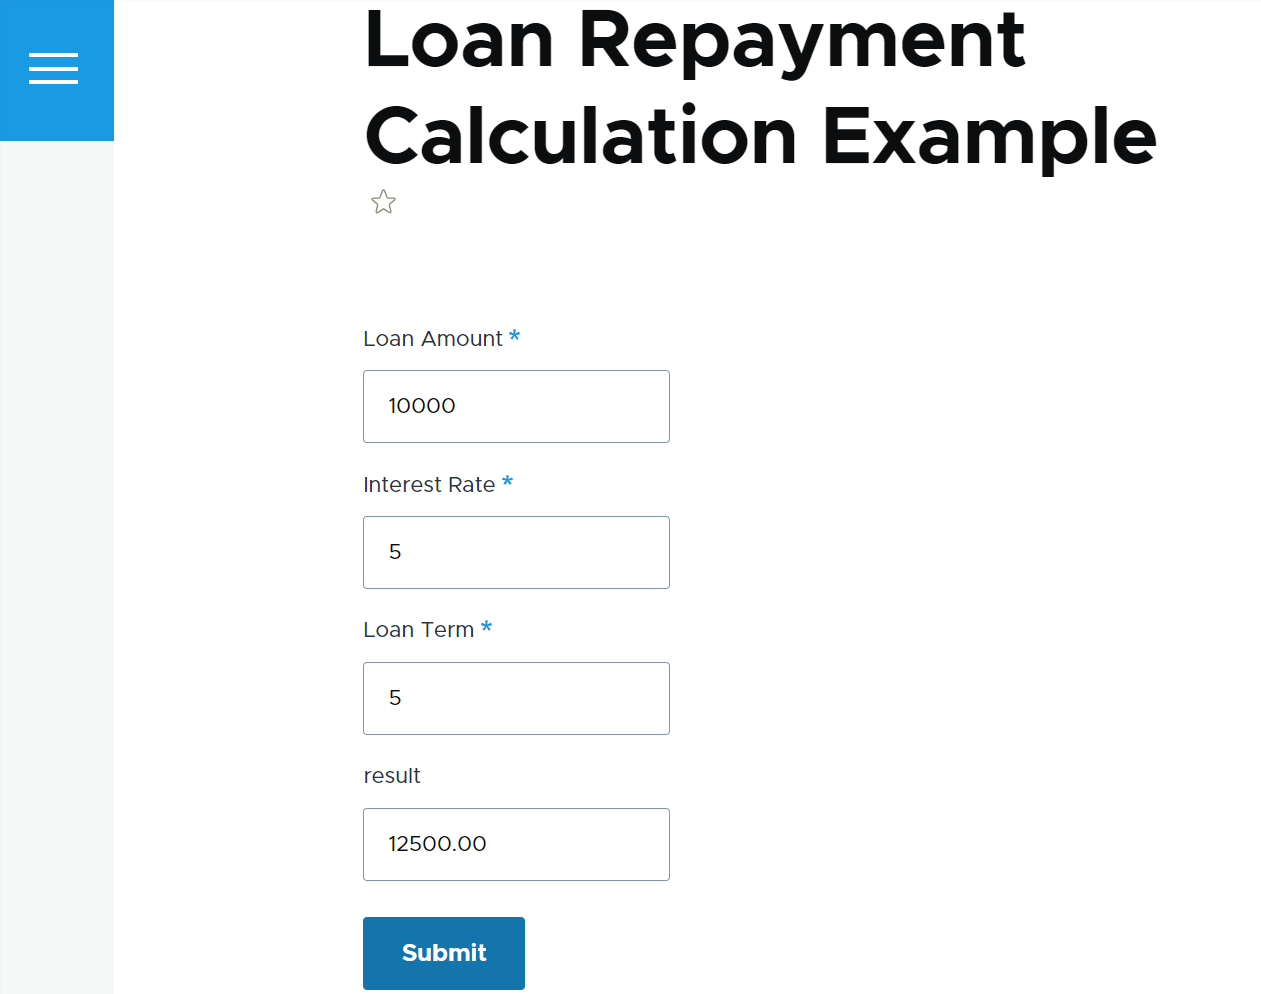 An example of a loan repayment calculator.